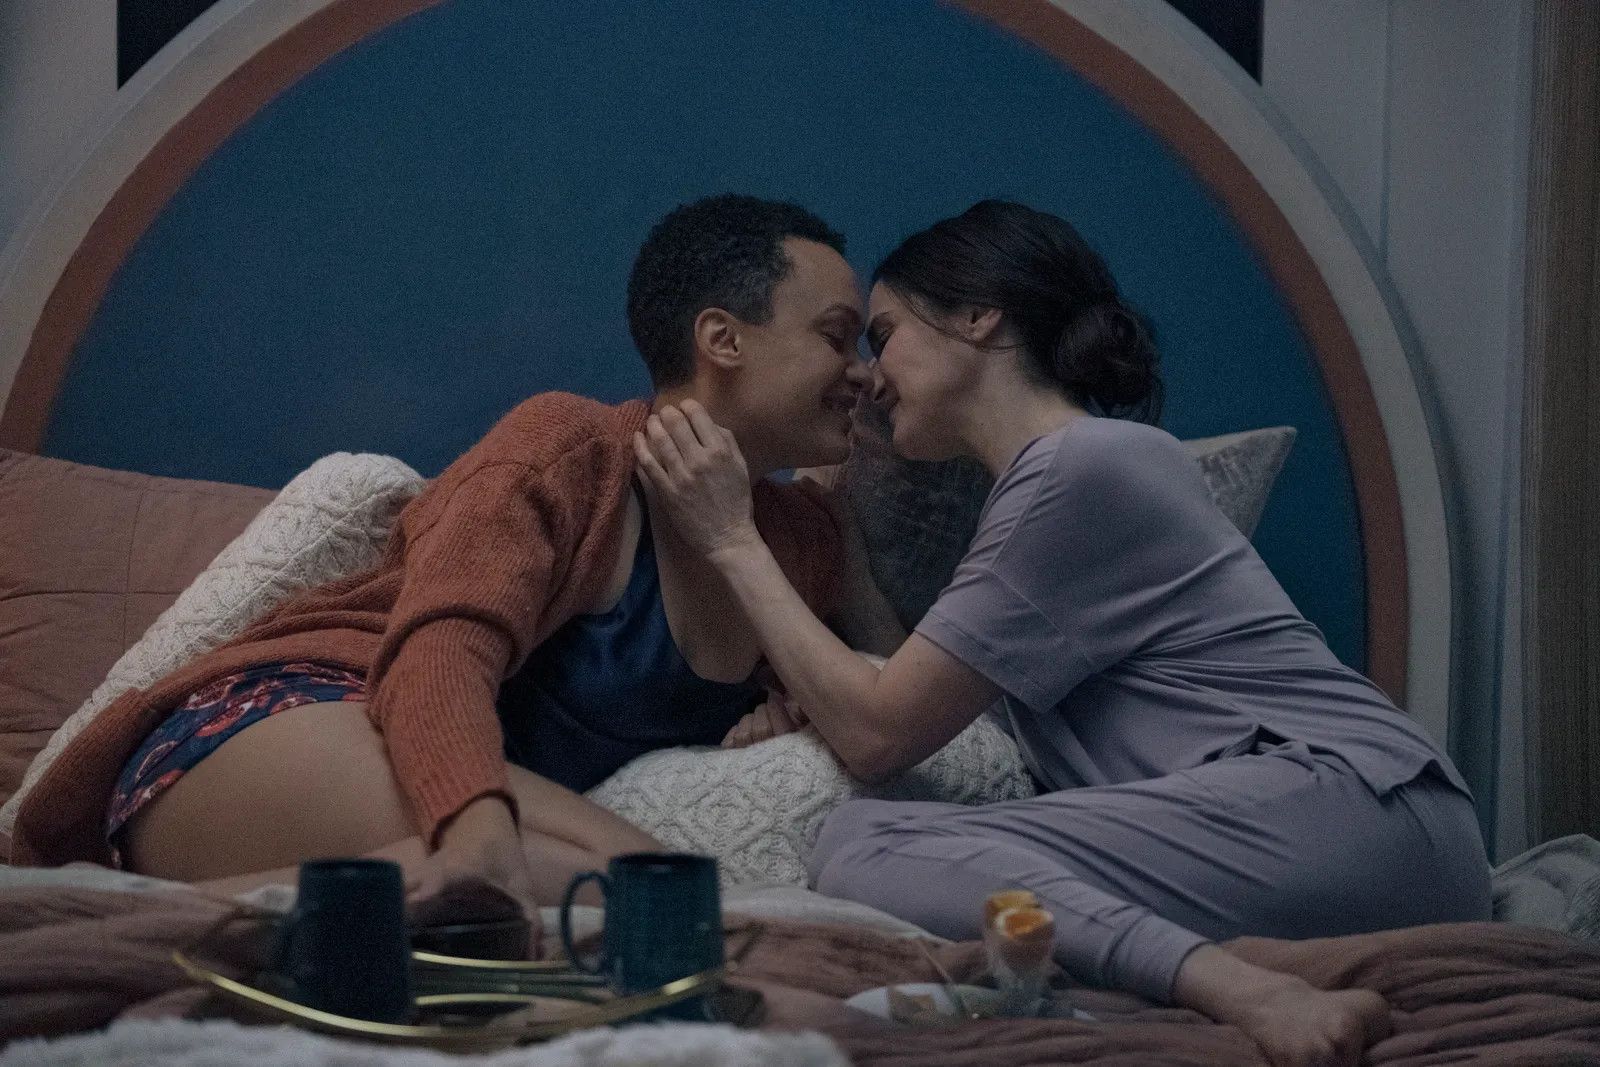 Rachel Weisz and Britne Oldford lying in bed together kissing while plates and cups set at their feet